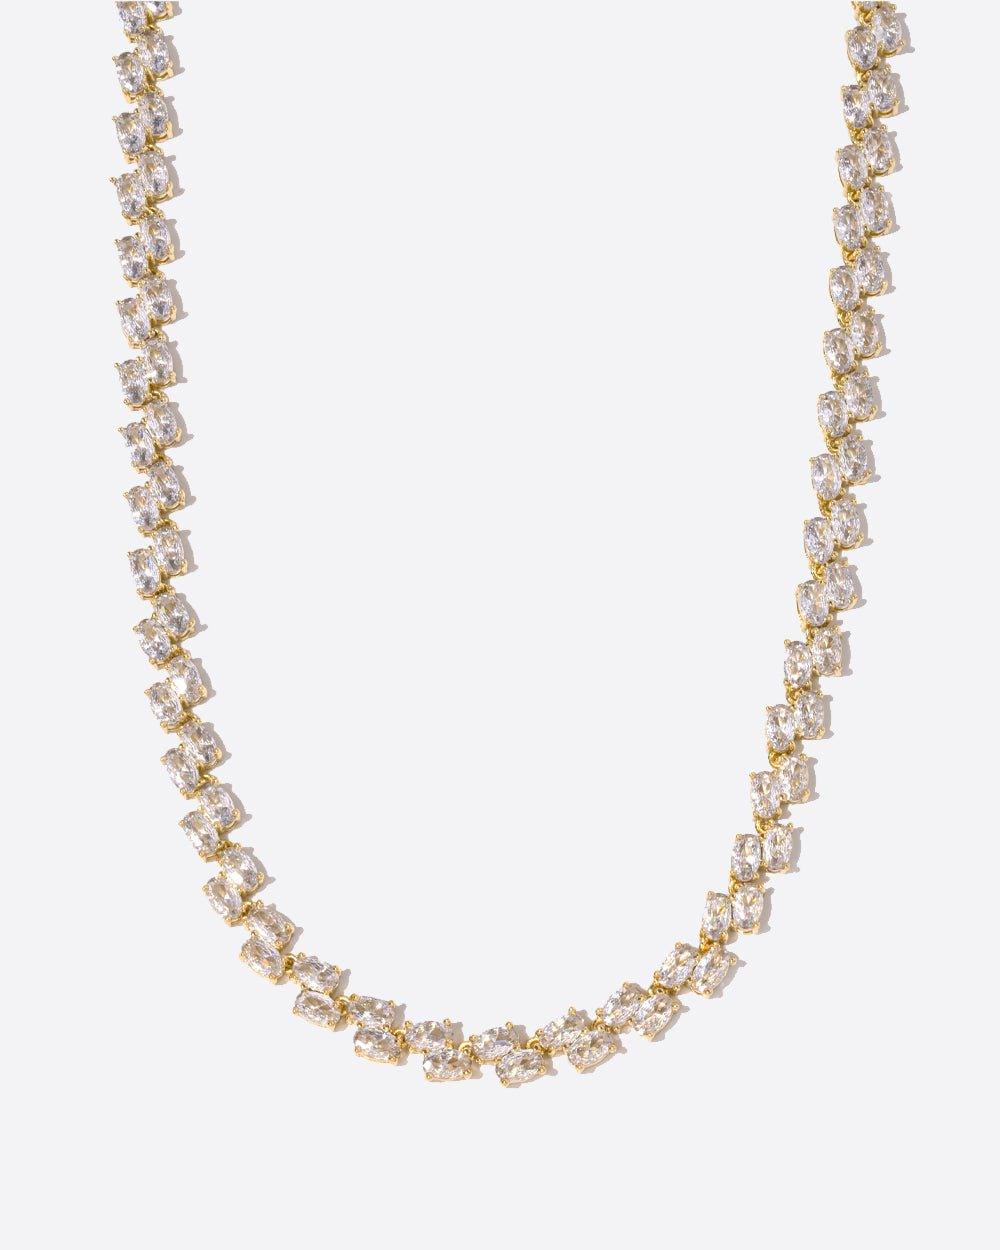 OVAL SPARKLE LINK CHAIN. - 18K GOLD - DRIP IN THE JEWEL